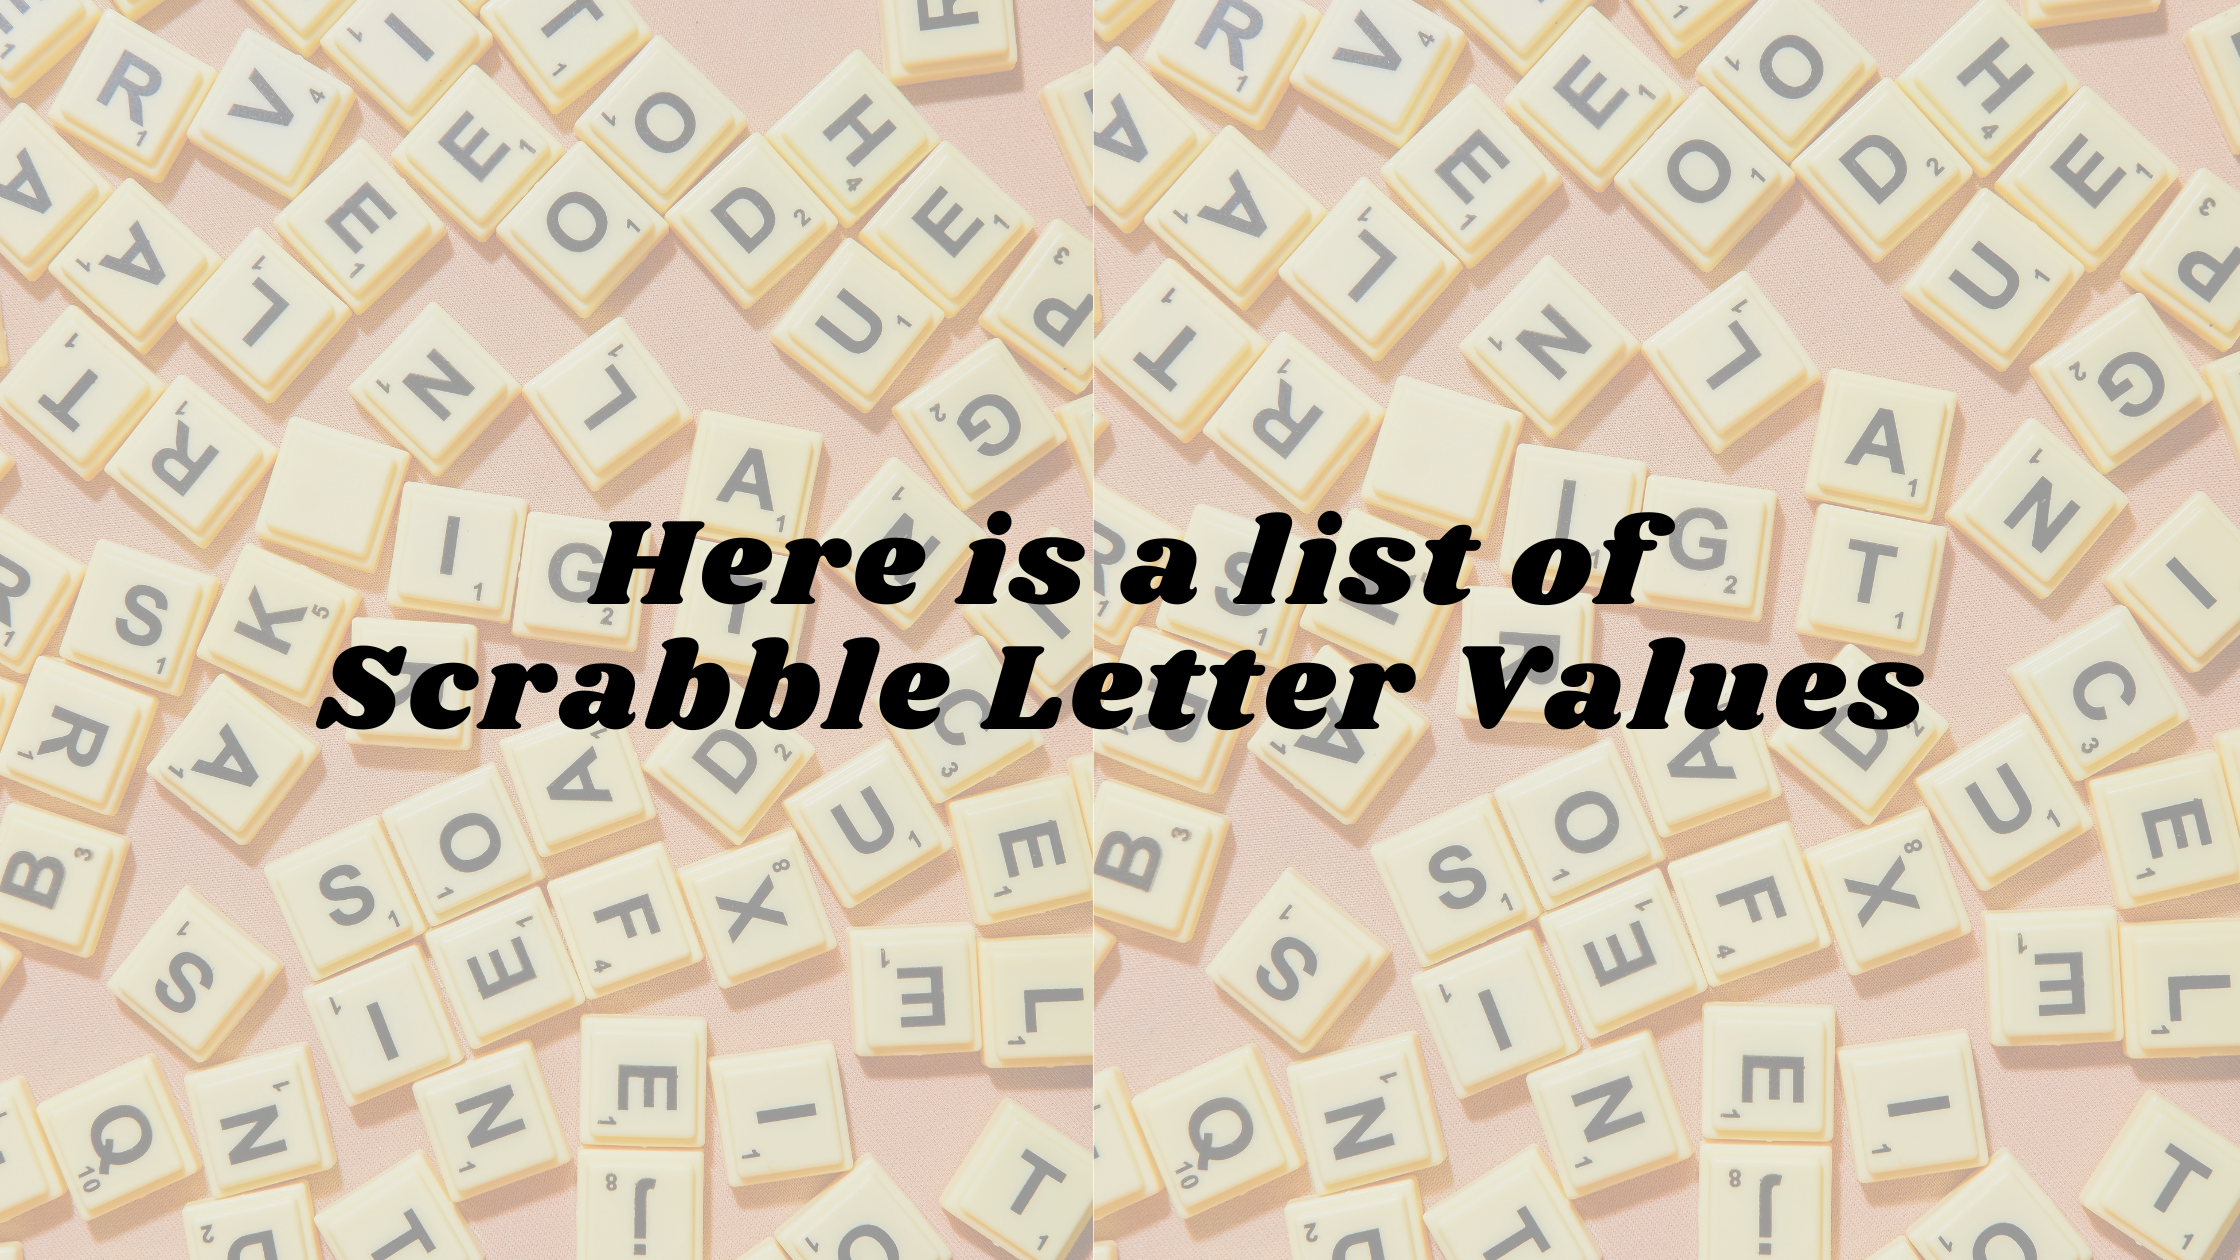 Here is a list of scrabble letter values